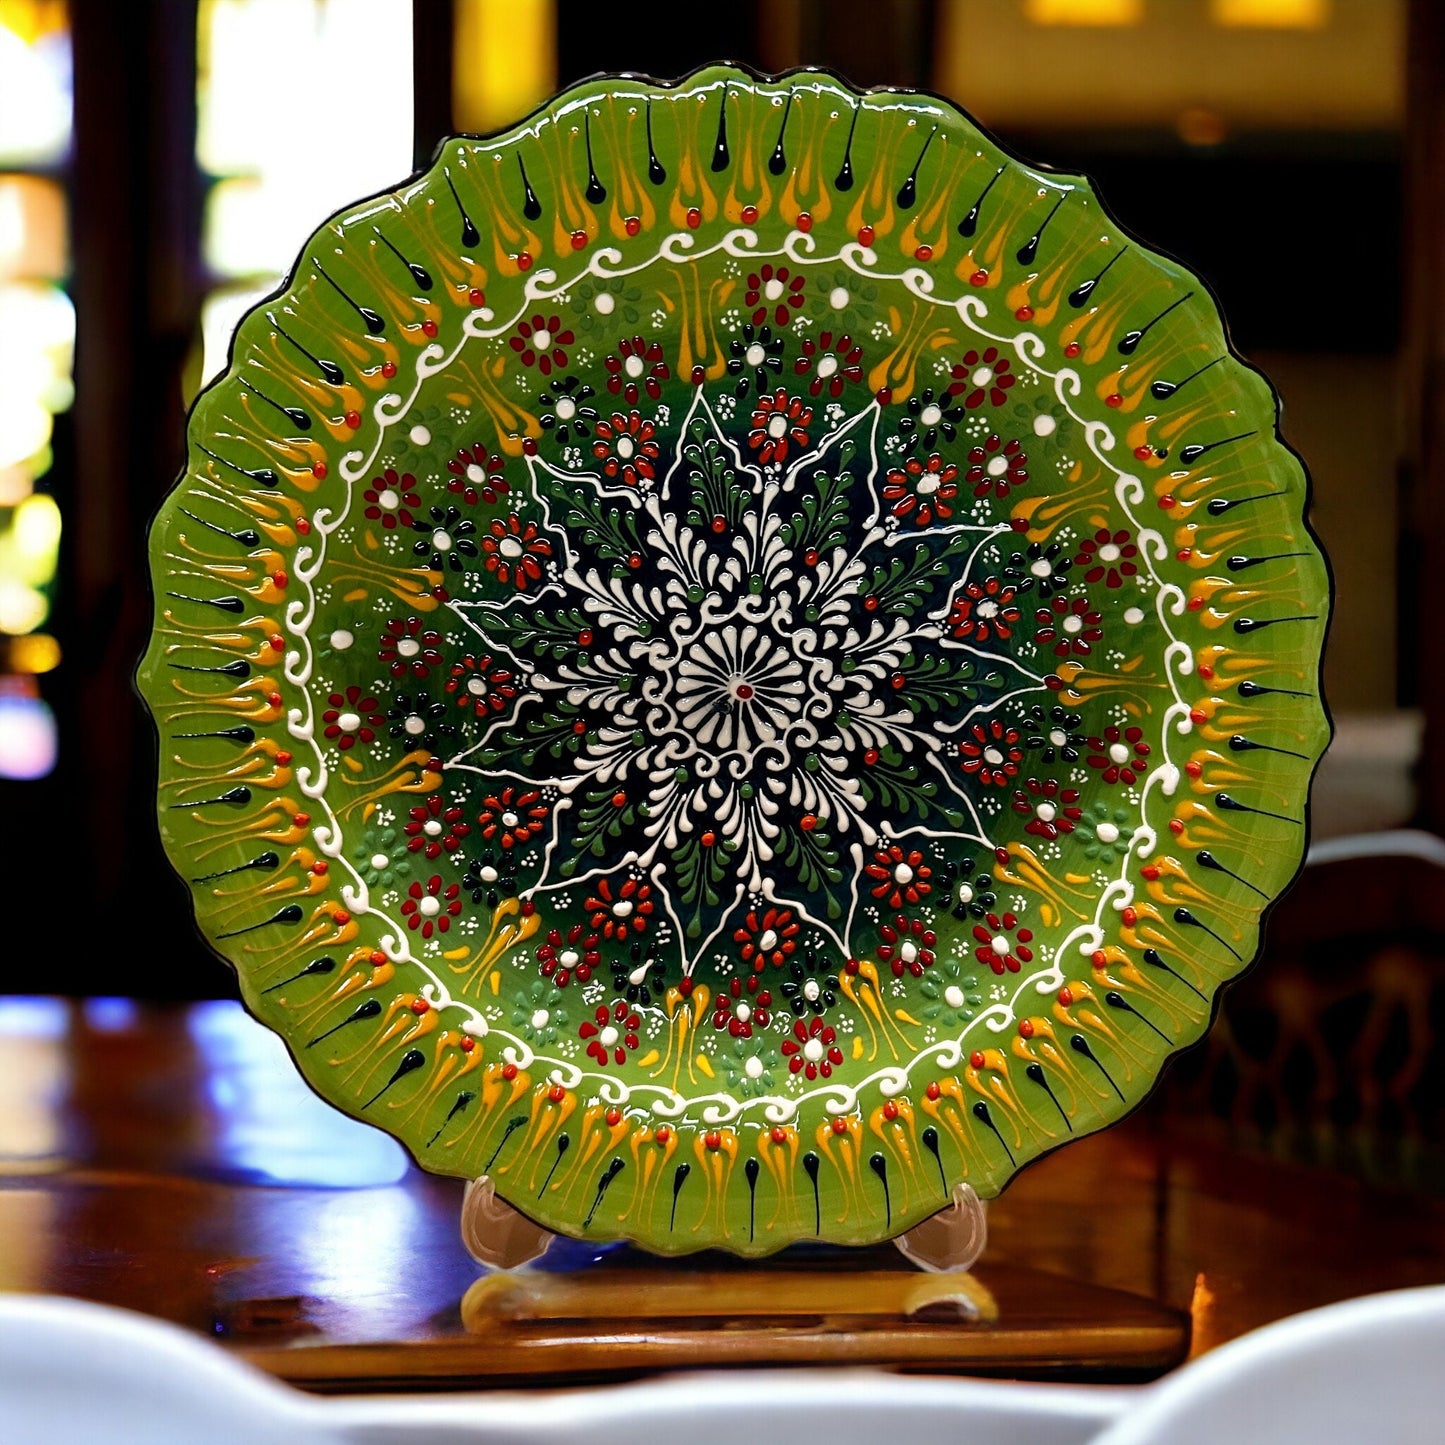 12” Turkish Ceramic Handmade & Painted Plate - Bright Green Dot Art Floral Tulip Patterned - Wall Hanging or Stand Use - Quick Ship!